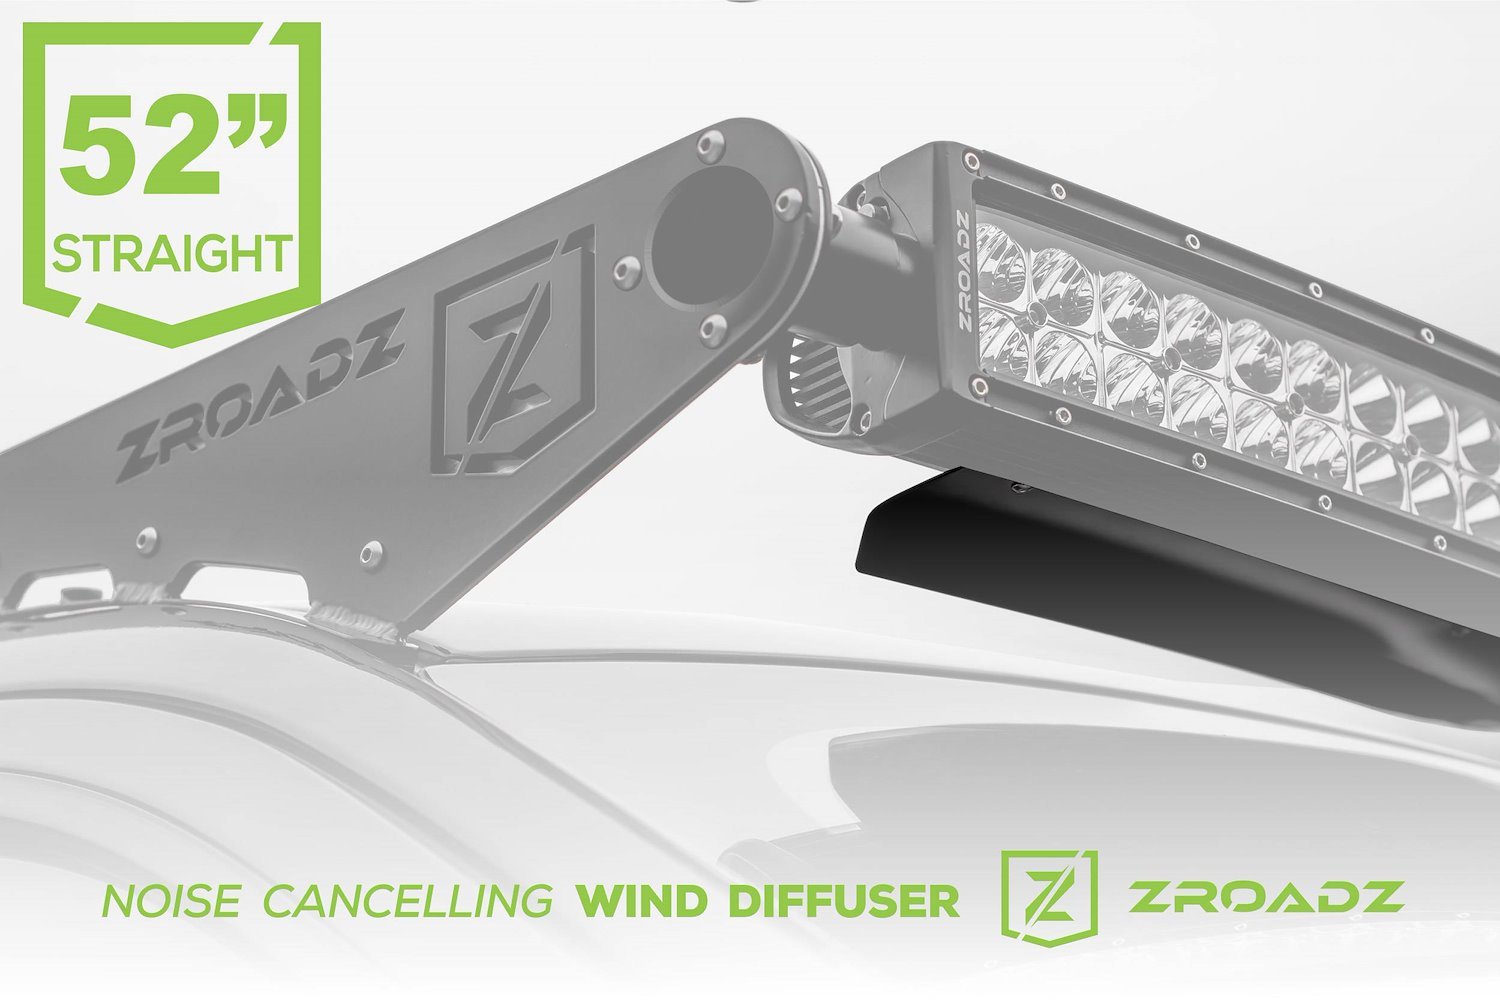 Noise Cancelling Wind Diffuser for 52 in. Straight LED Light Bar